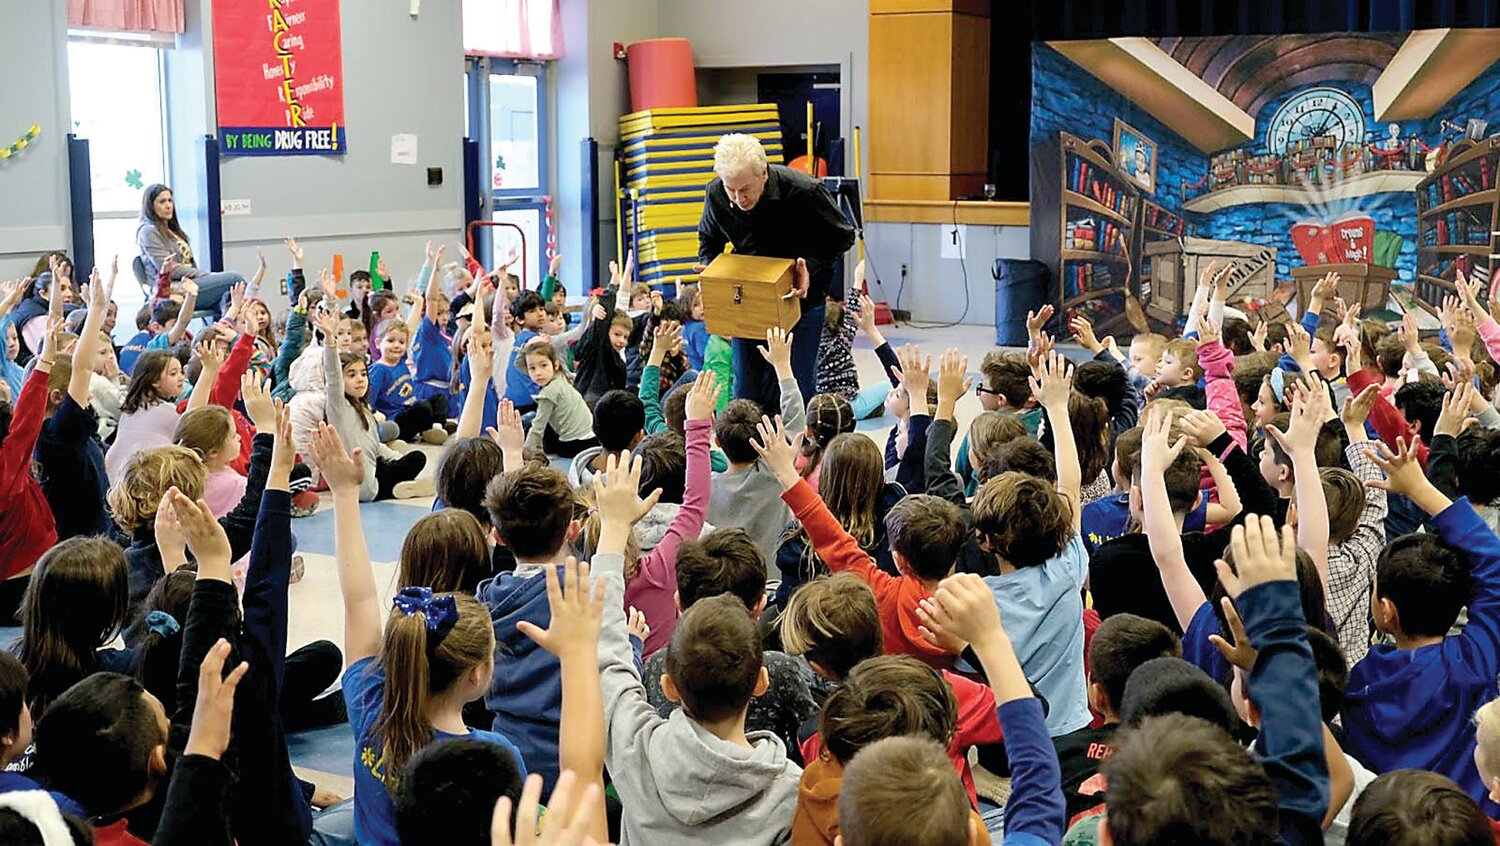 Elementary students from New Hope-Solebury School District participated in an interactive assembly titled “Books: The Magic Is Real with Joe Romano.” Romano used humor and magic tricks to highlight the plots and characters of famous children’s books, such as “Harry Potter,” “Diary of a Wimpy Kid” and “Holes.”